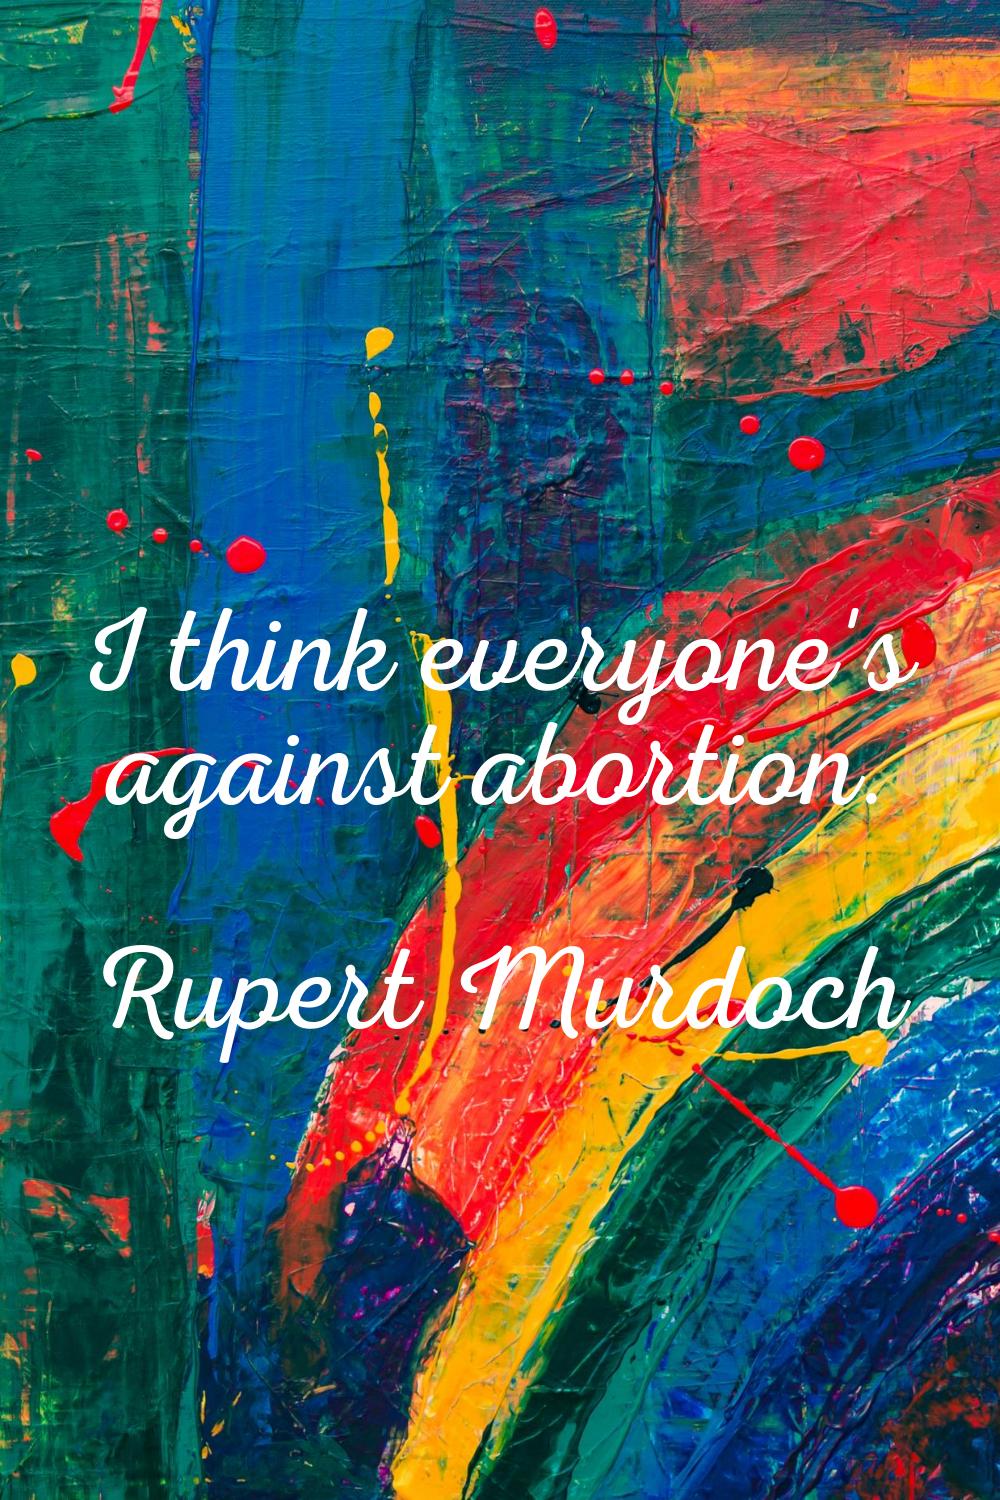 I think everyone's against abortion.